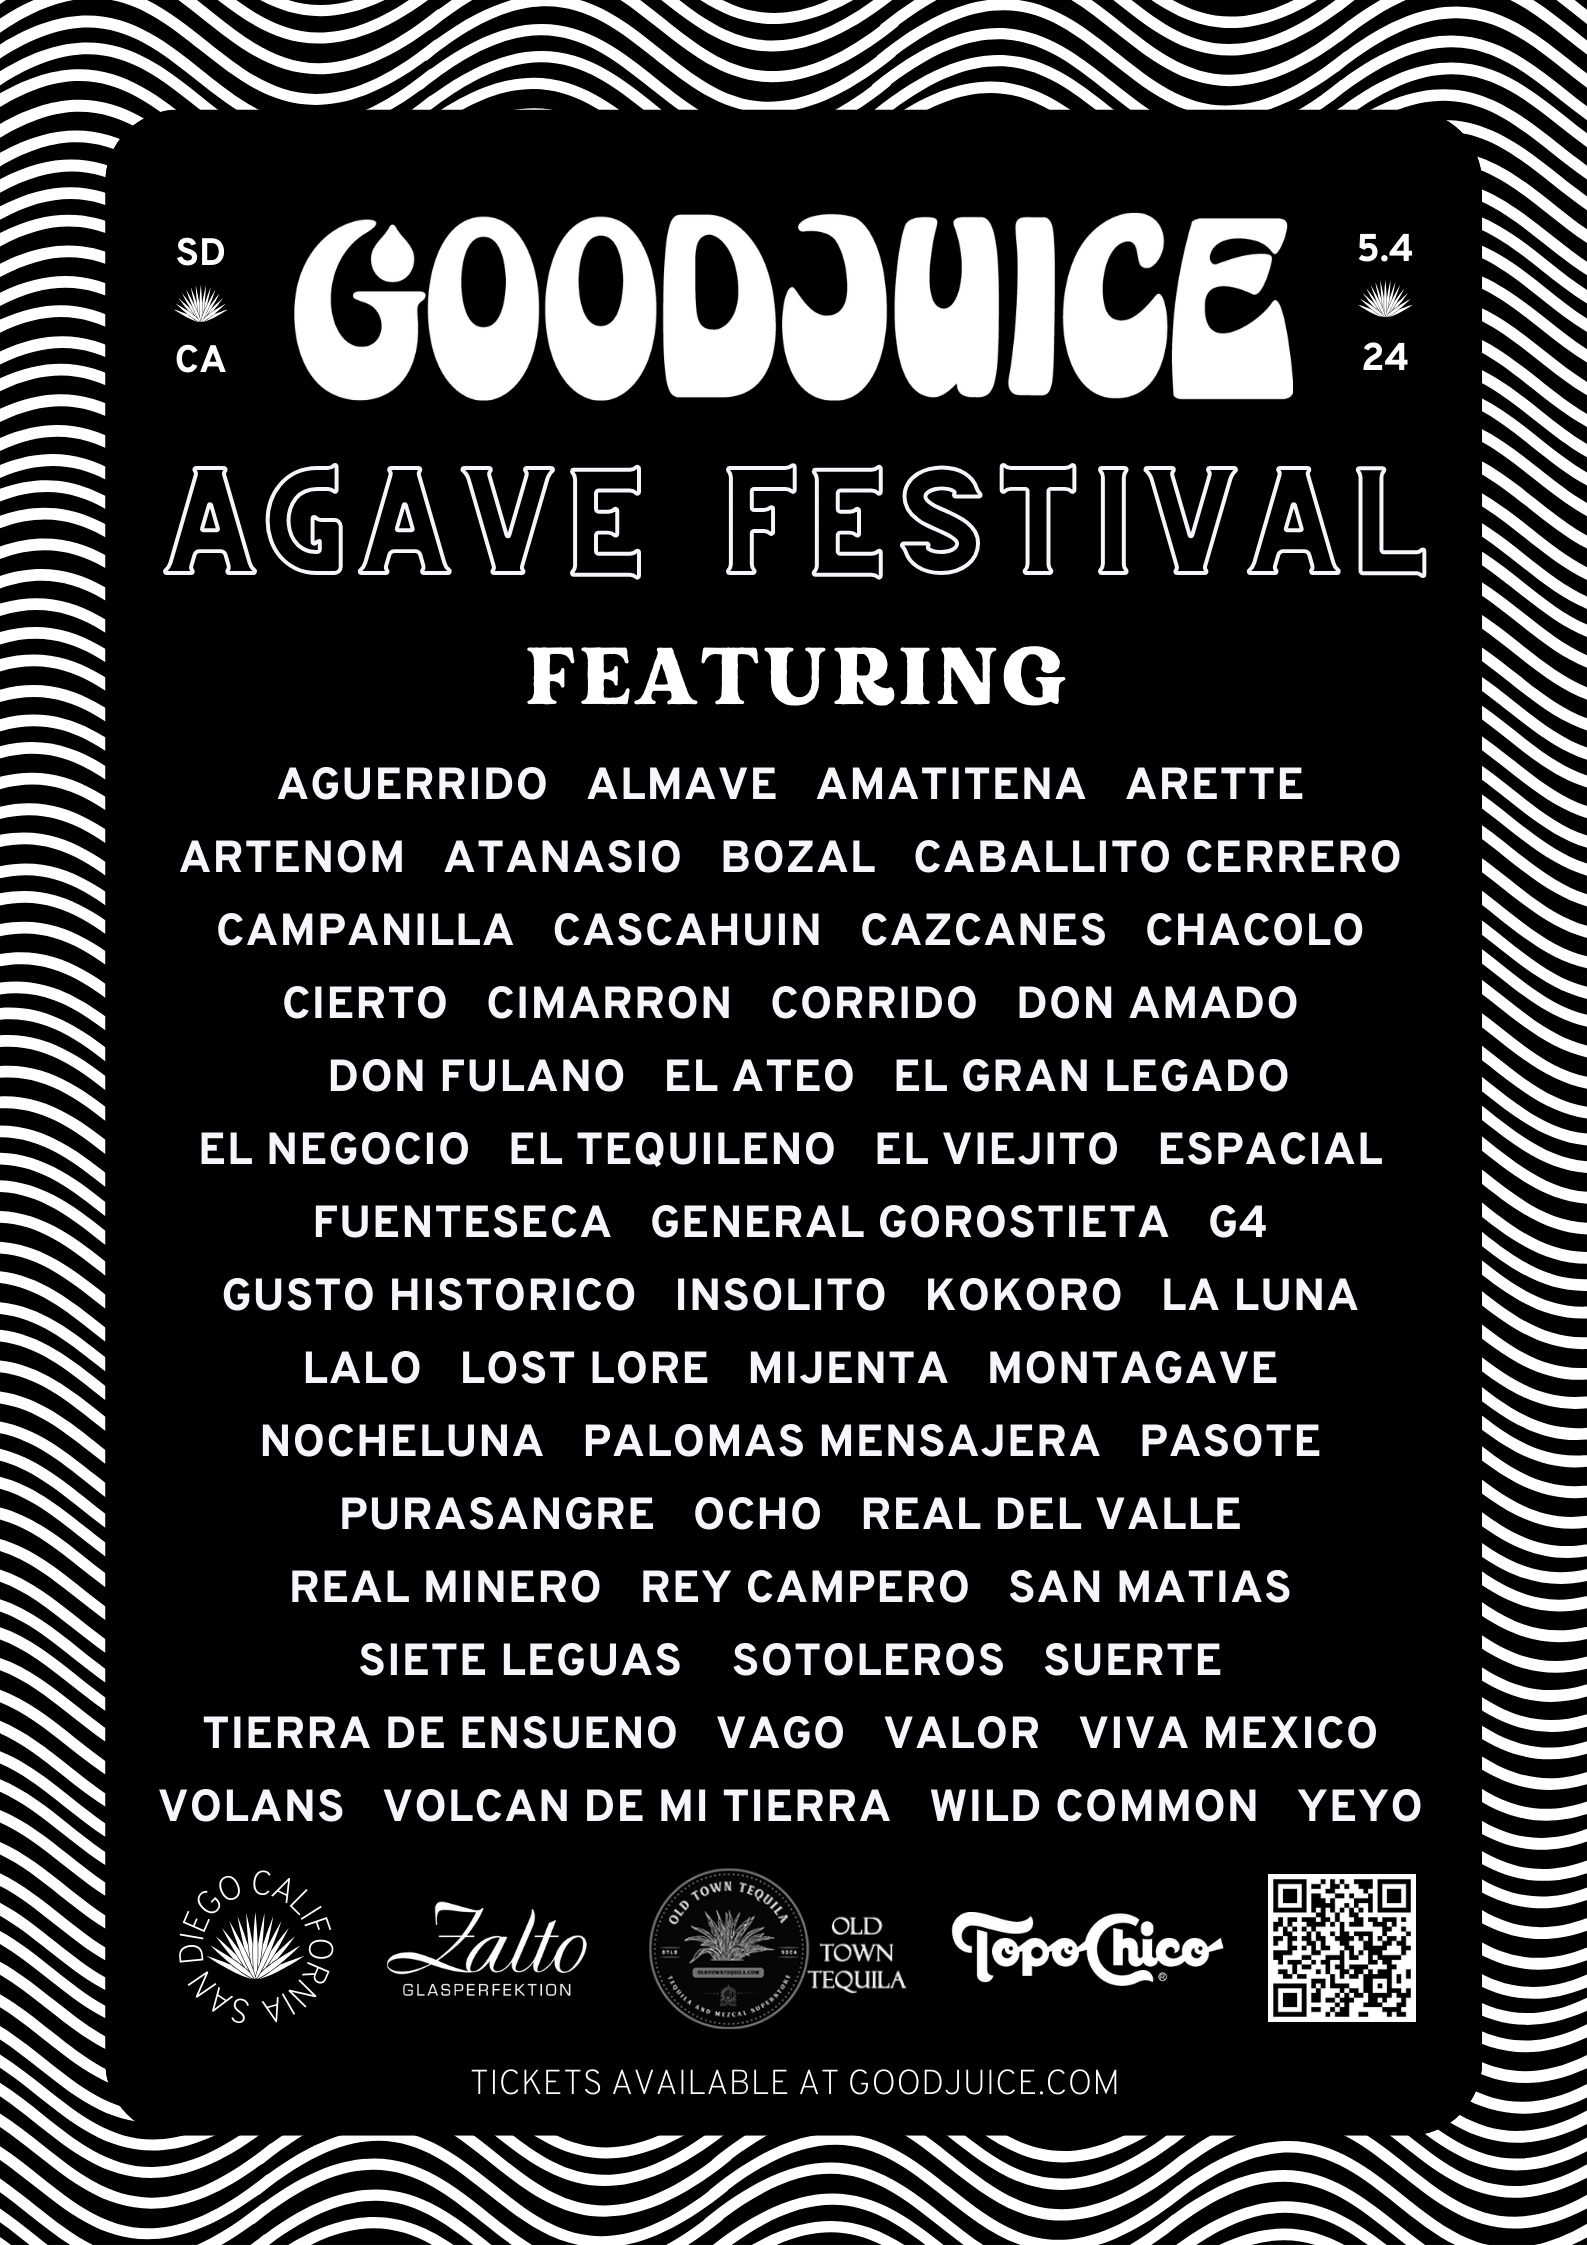 The Goodjuice Agave Festival comes to San Diego with an amazing lineup of craft tequilas and mezcals.